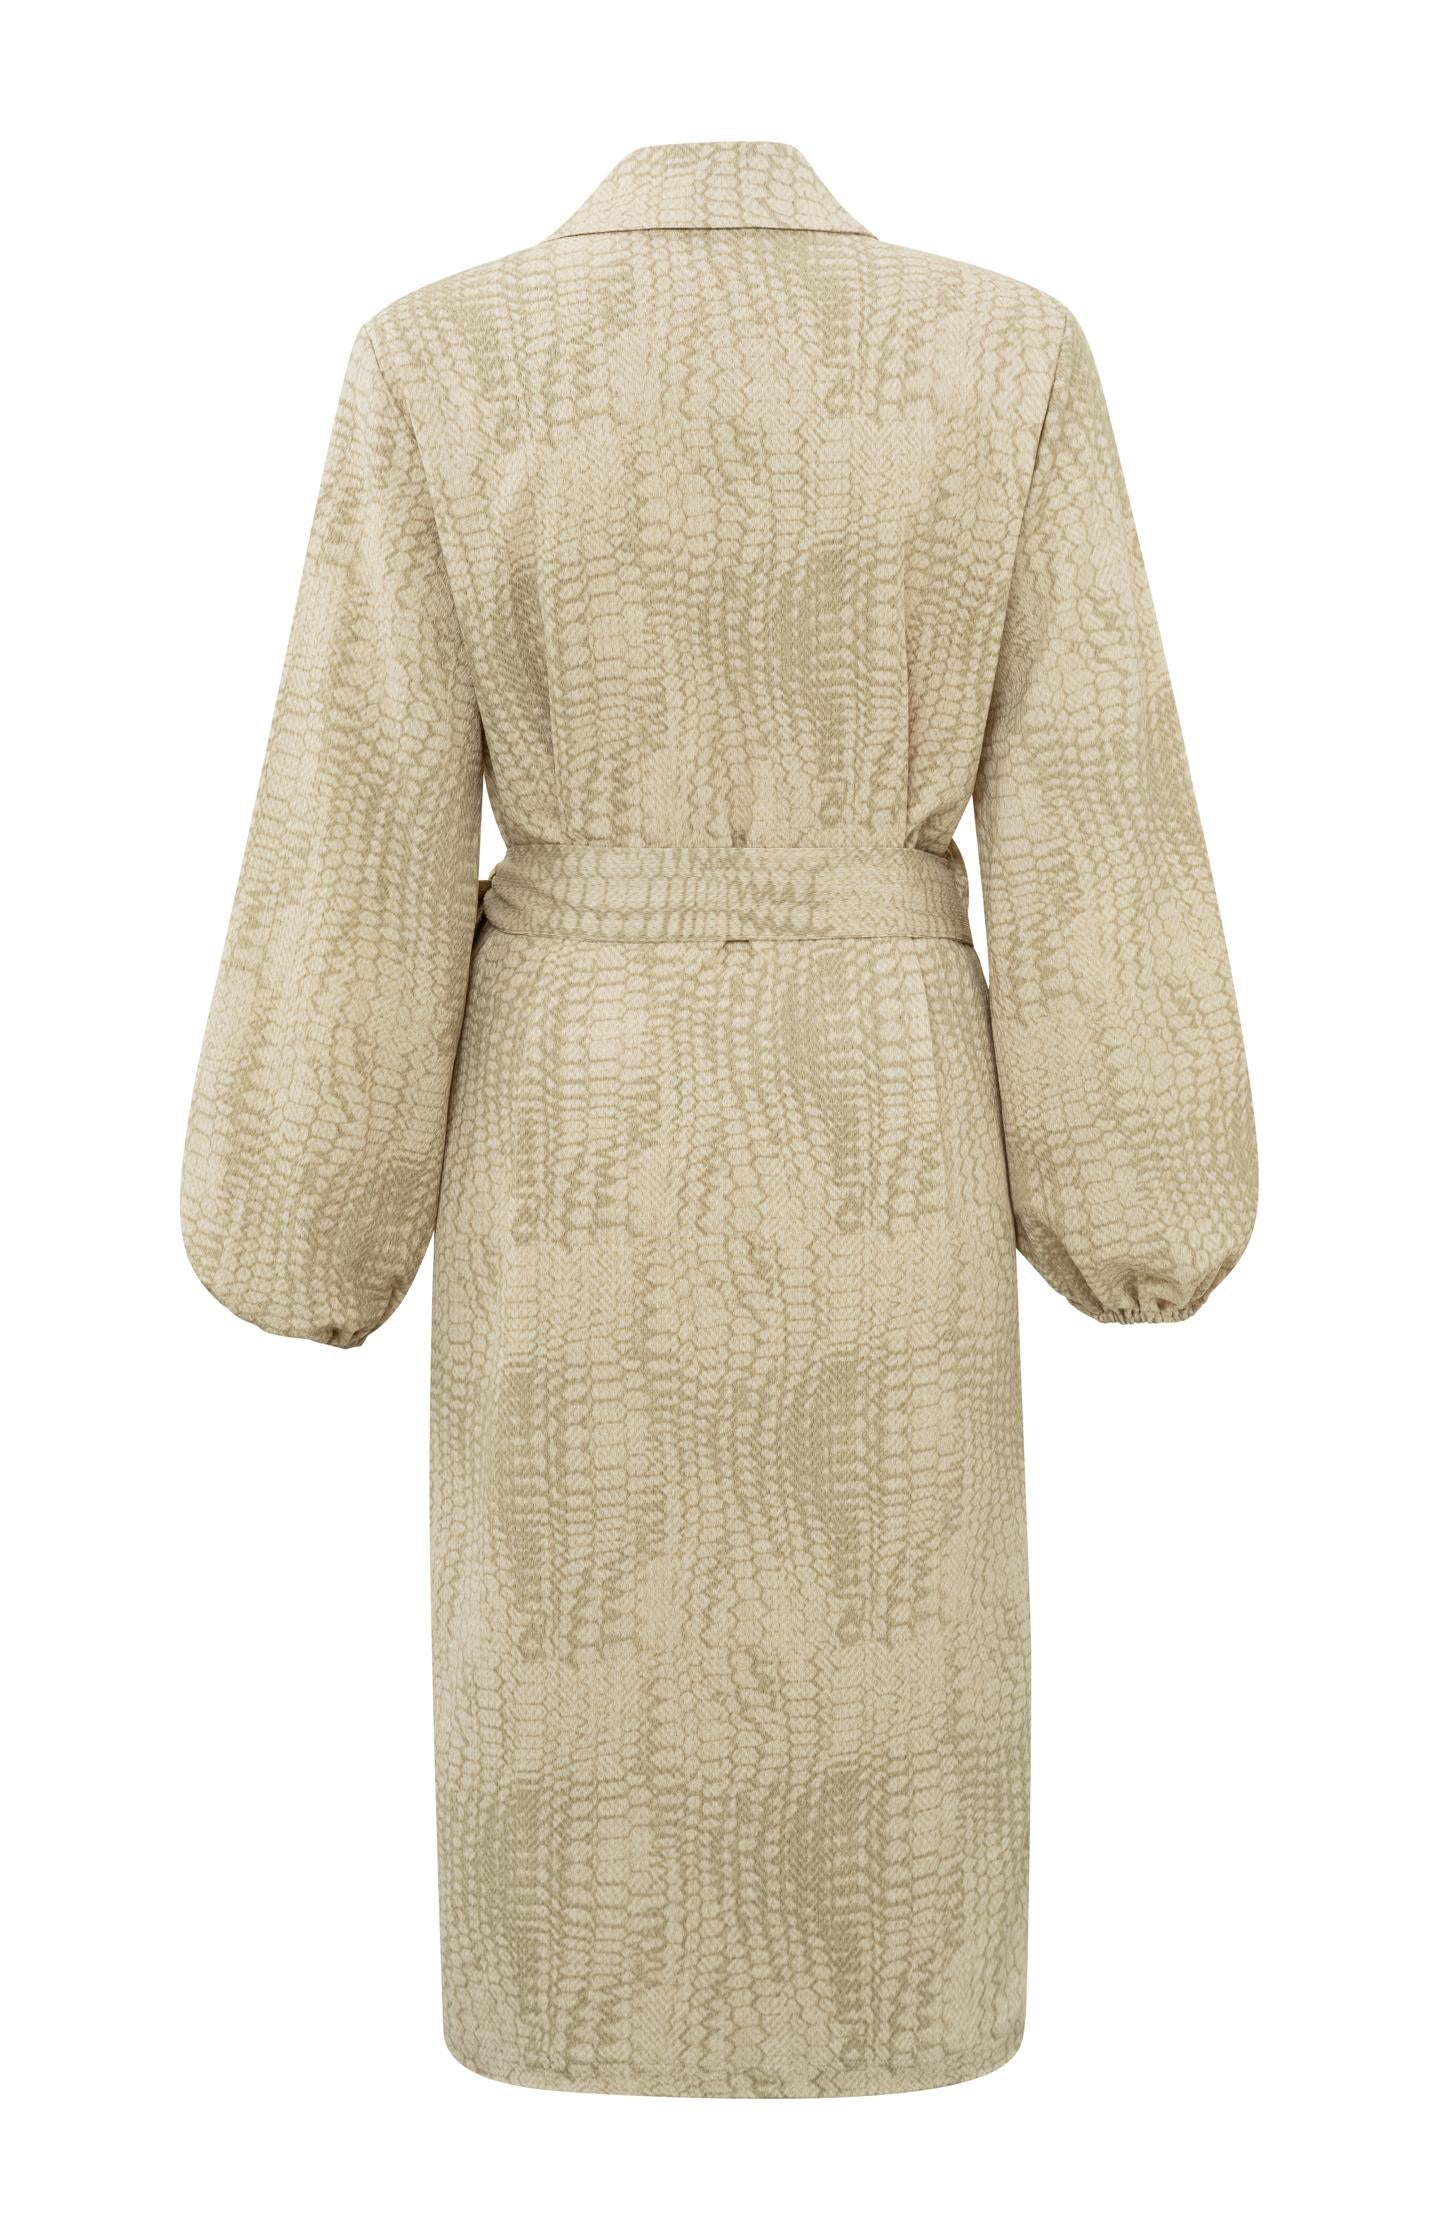 Wrap dress with V-neck, long balloon sleeves and snake print